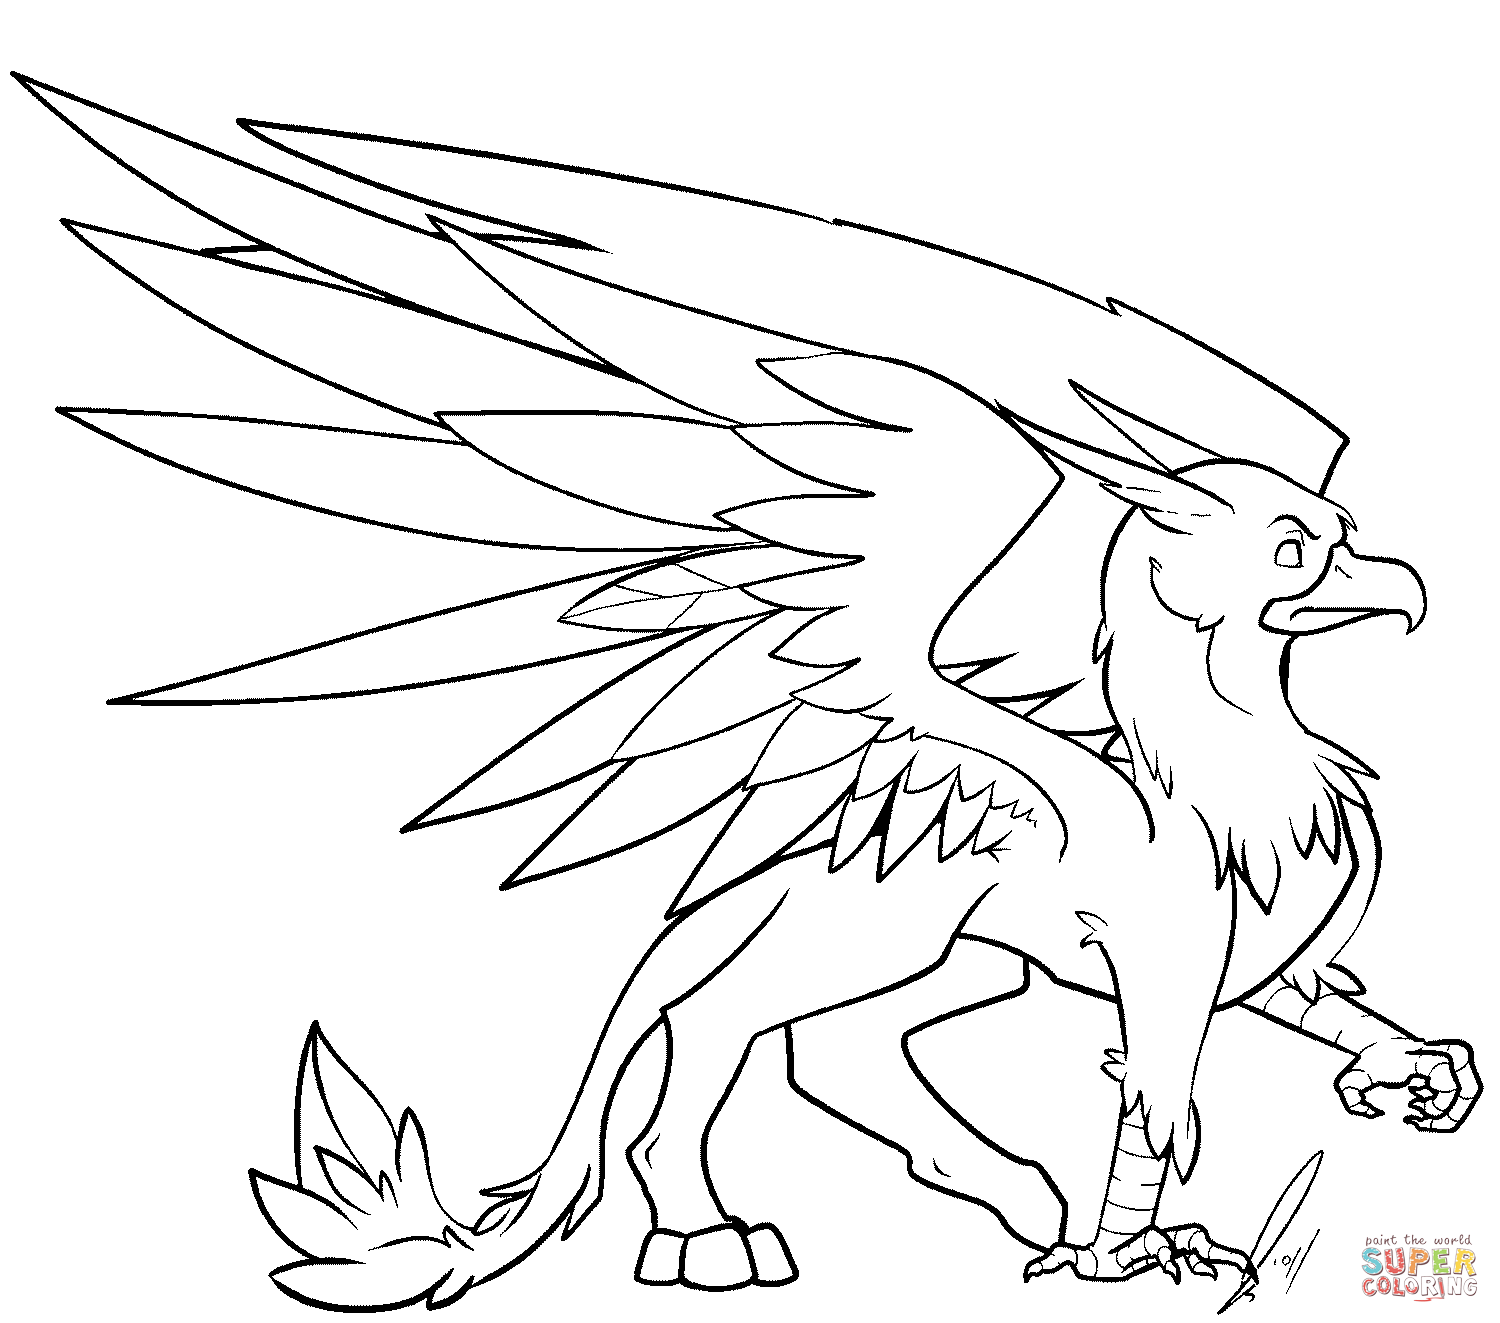 Griffon coloring #14, Download drawings